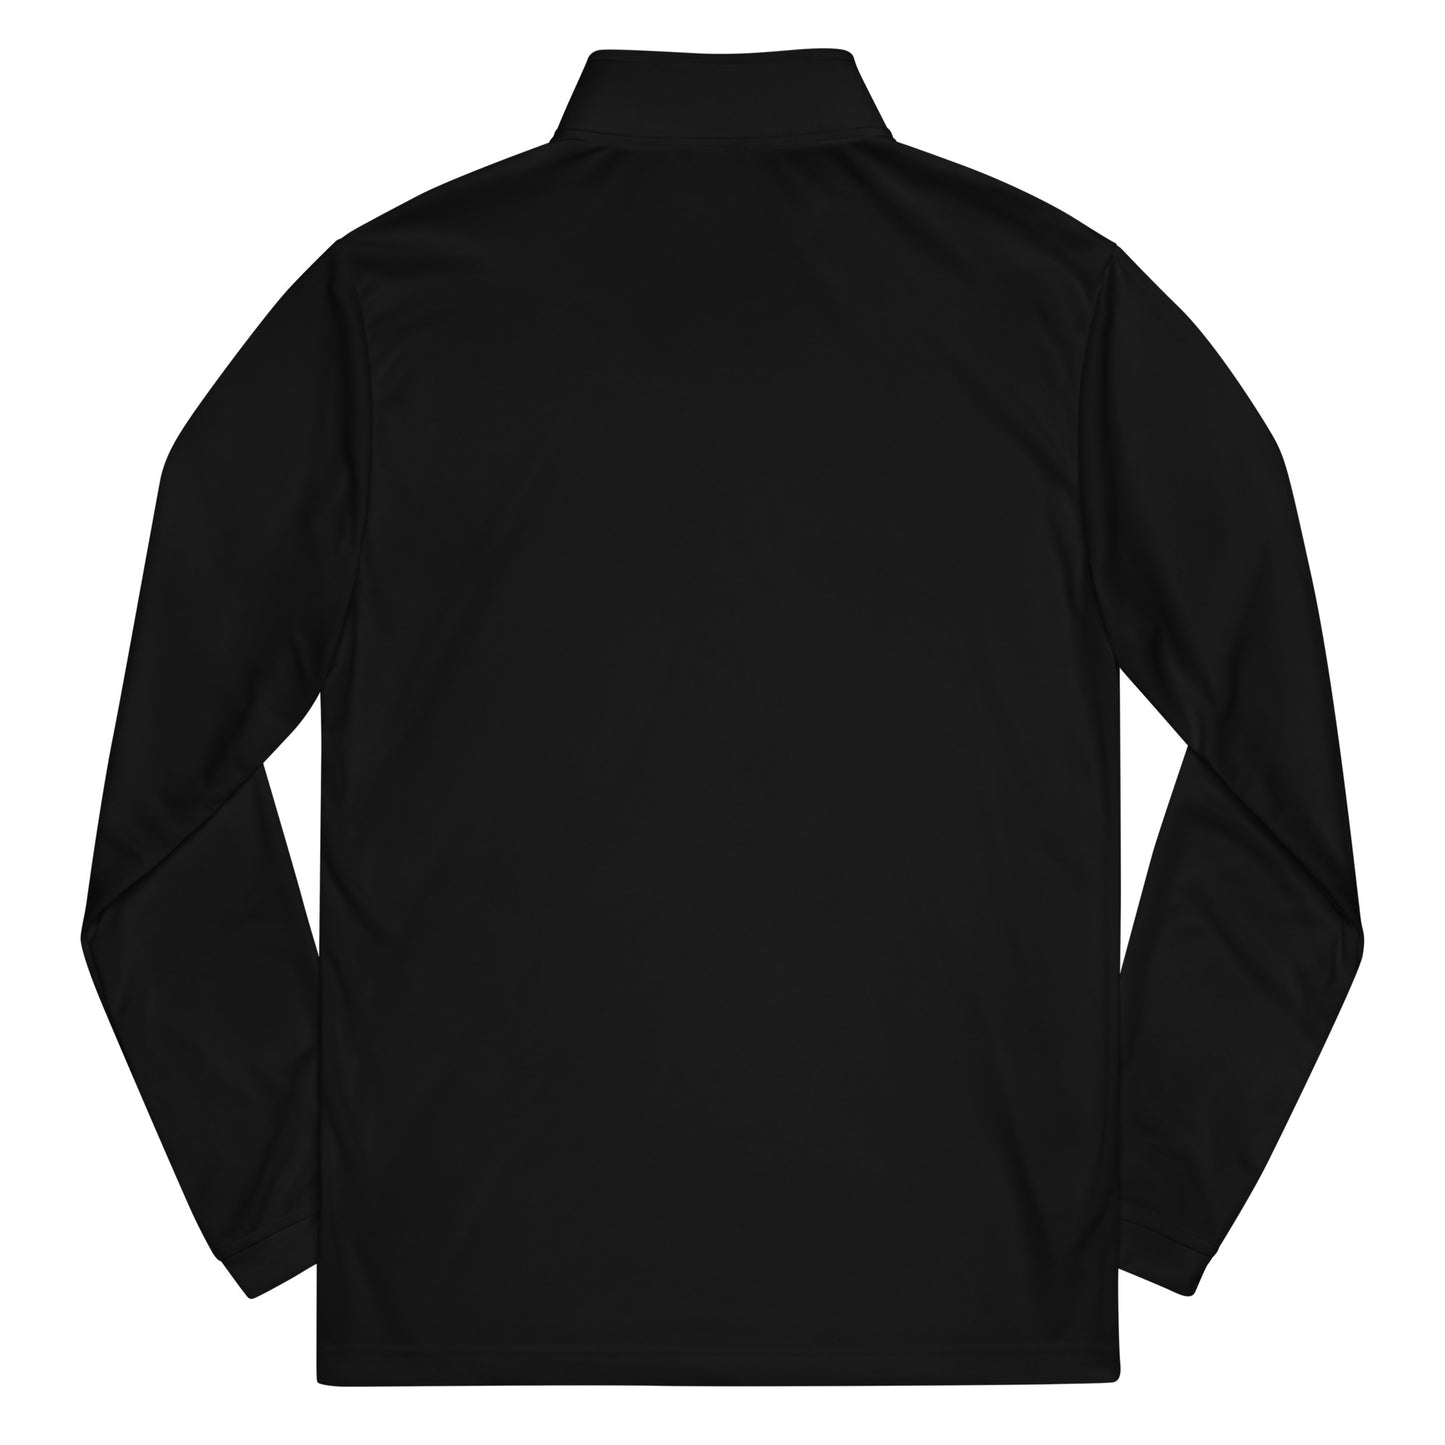 His Glory 3.0 - NEW - Embroidery - Quarter zip pullover